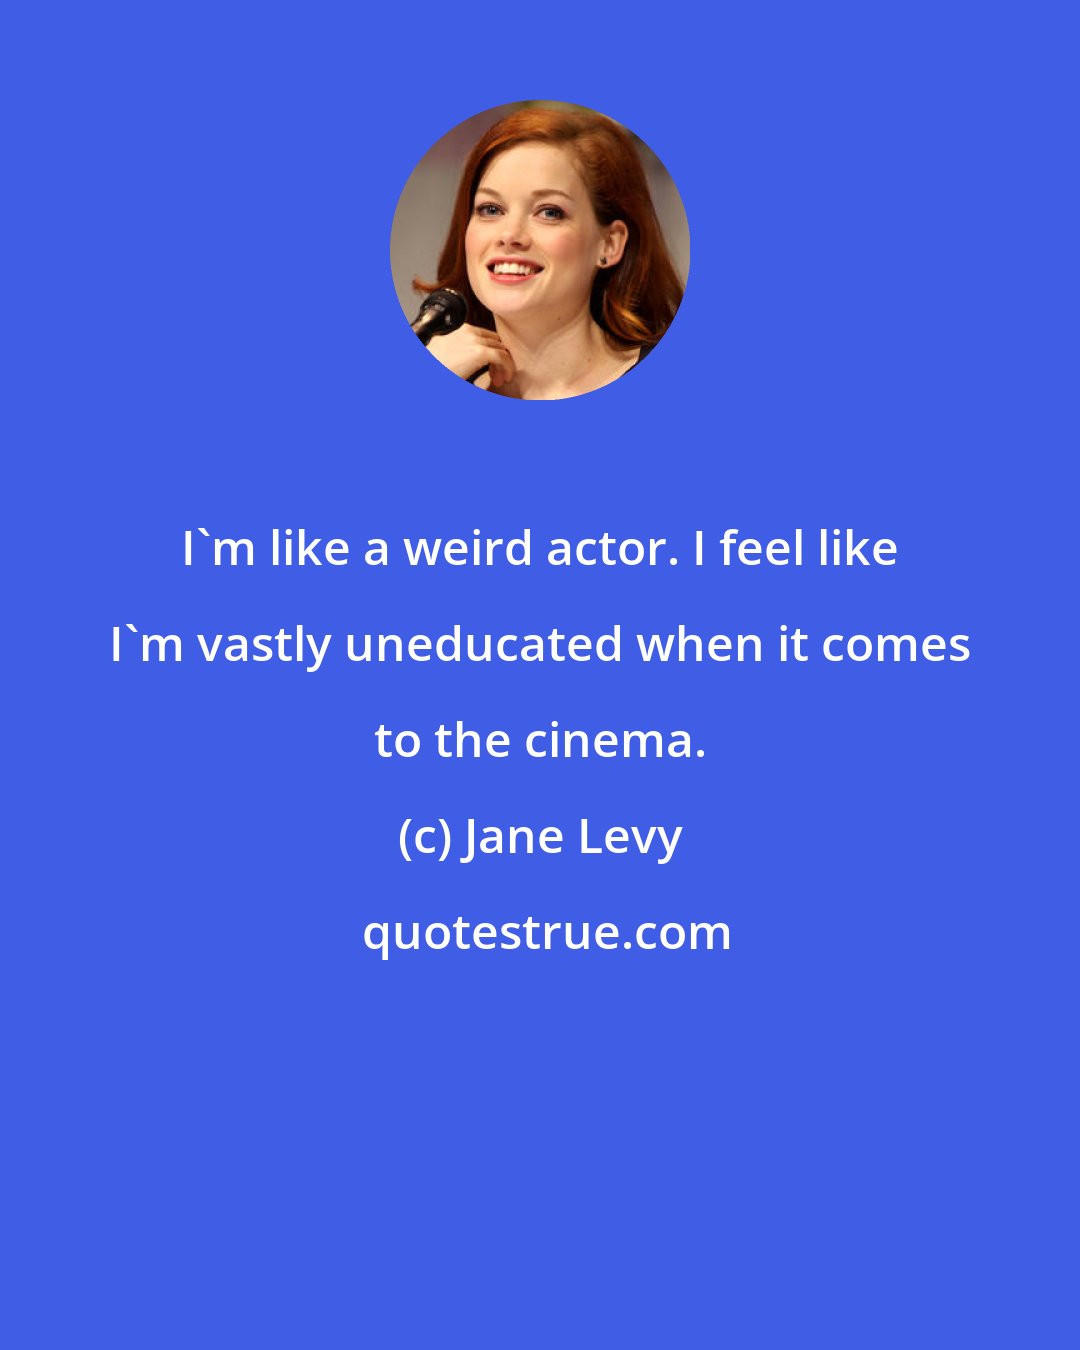 Jane Levy: I'm like a weird actor. I feel like I'm vastly uneducated when it comes to the cinema.